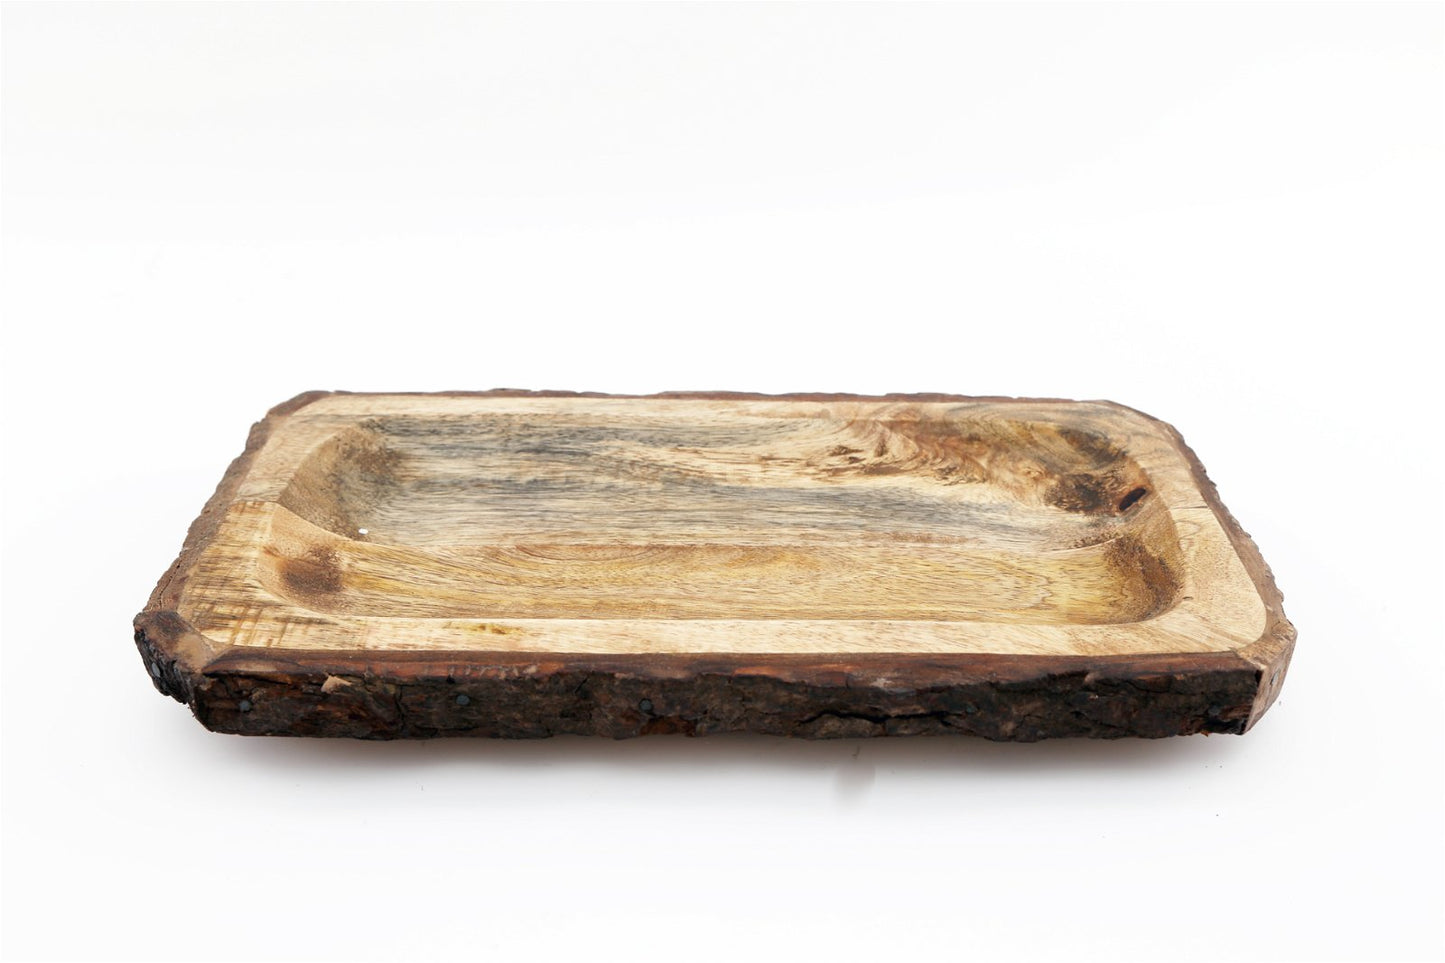 Small Wooden Platter Tray With Bark Edging